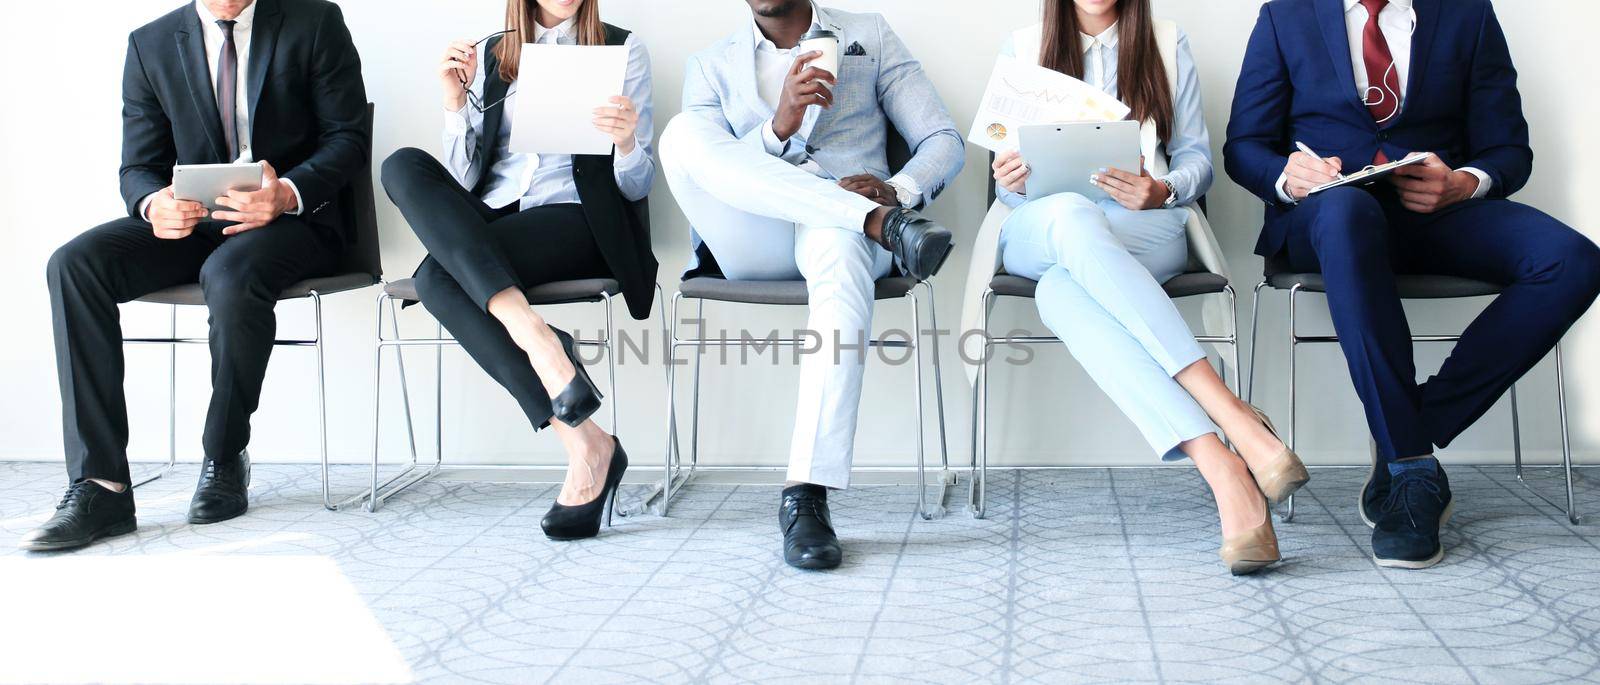 Stressful business people waiting for job interview by tsyhun